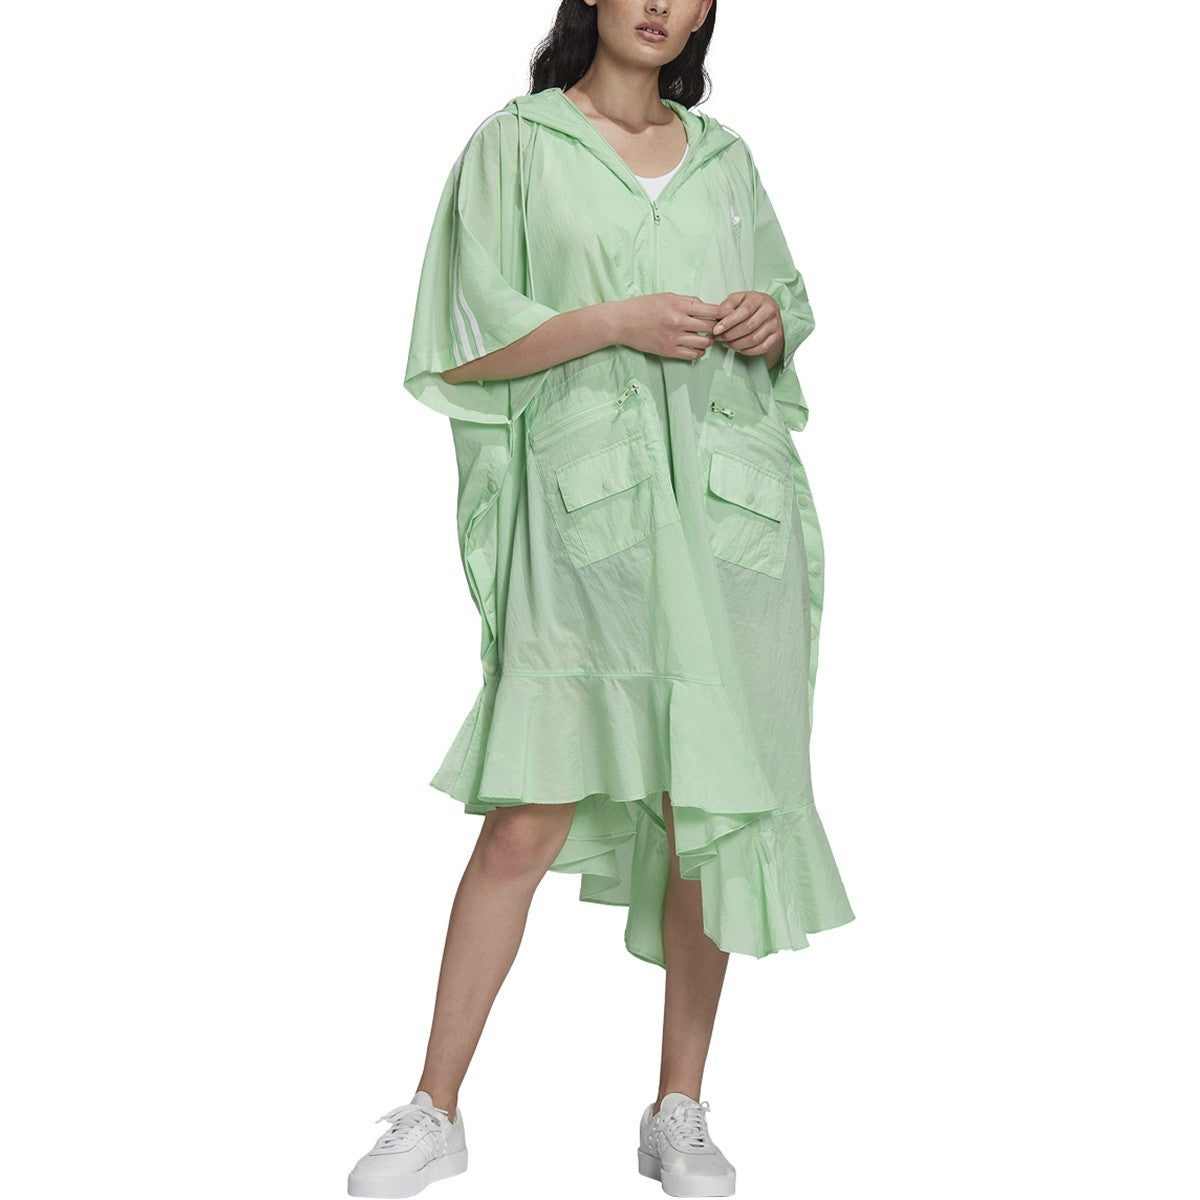 FT9875] Womens Originals Poncho rubbersoled